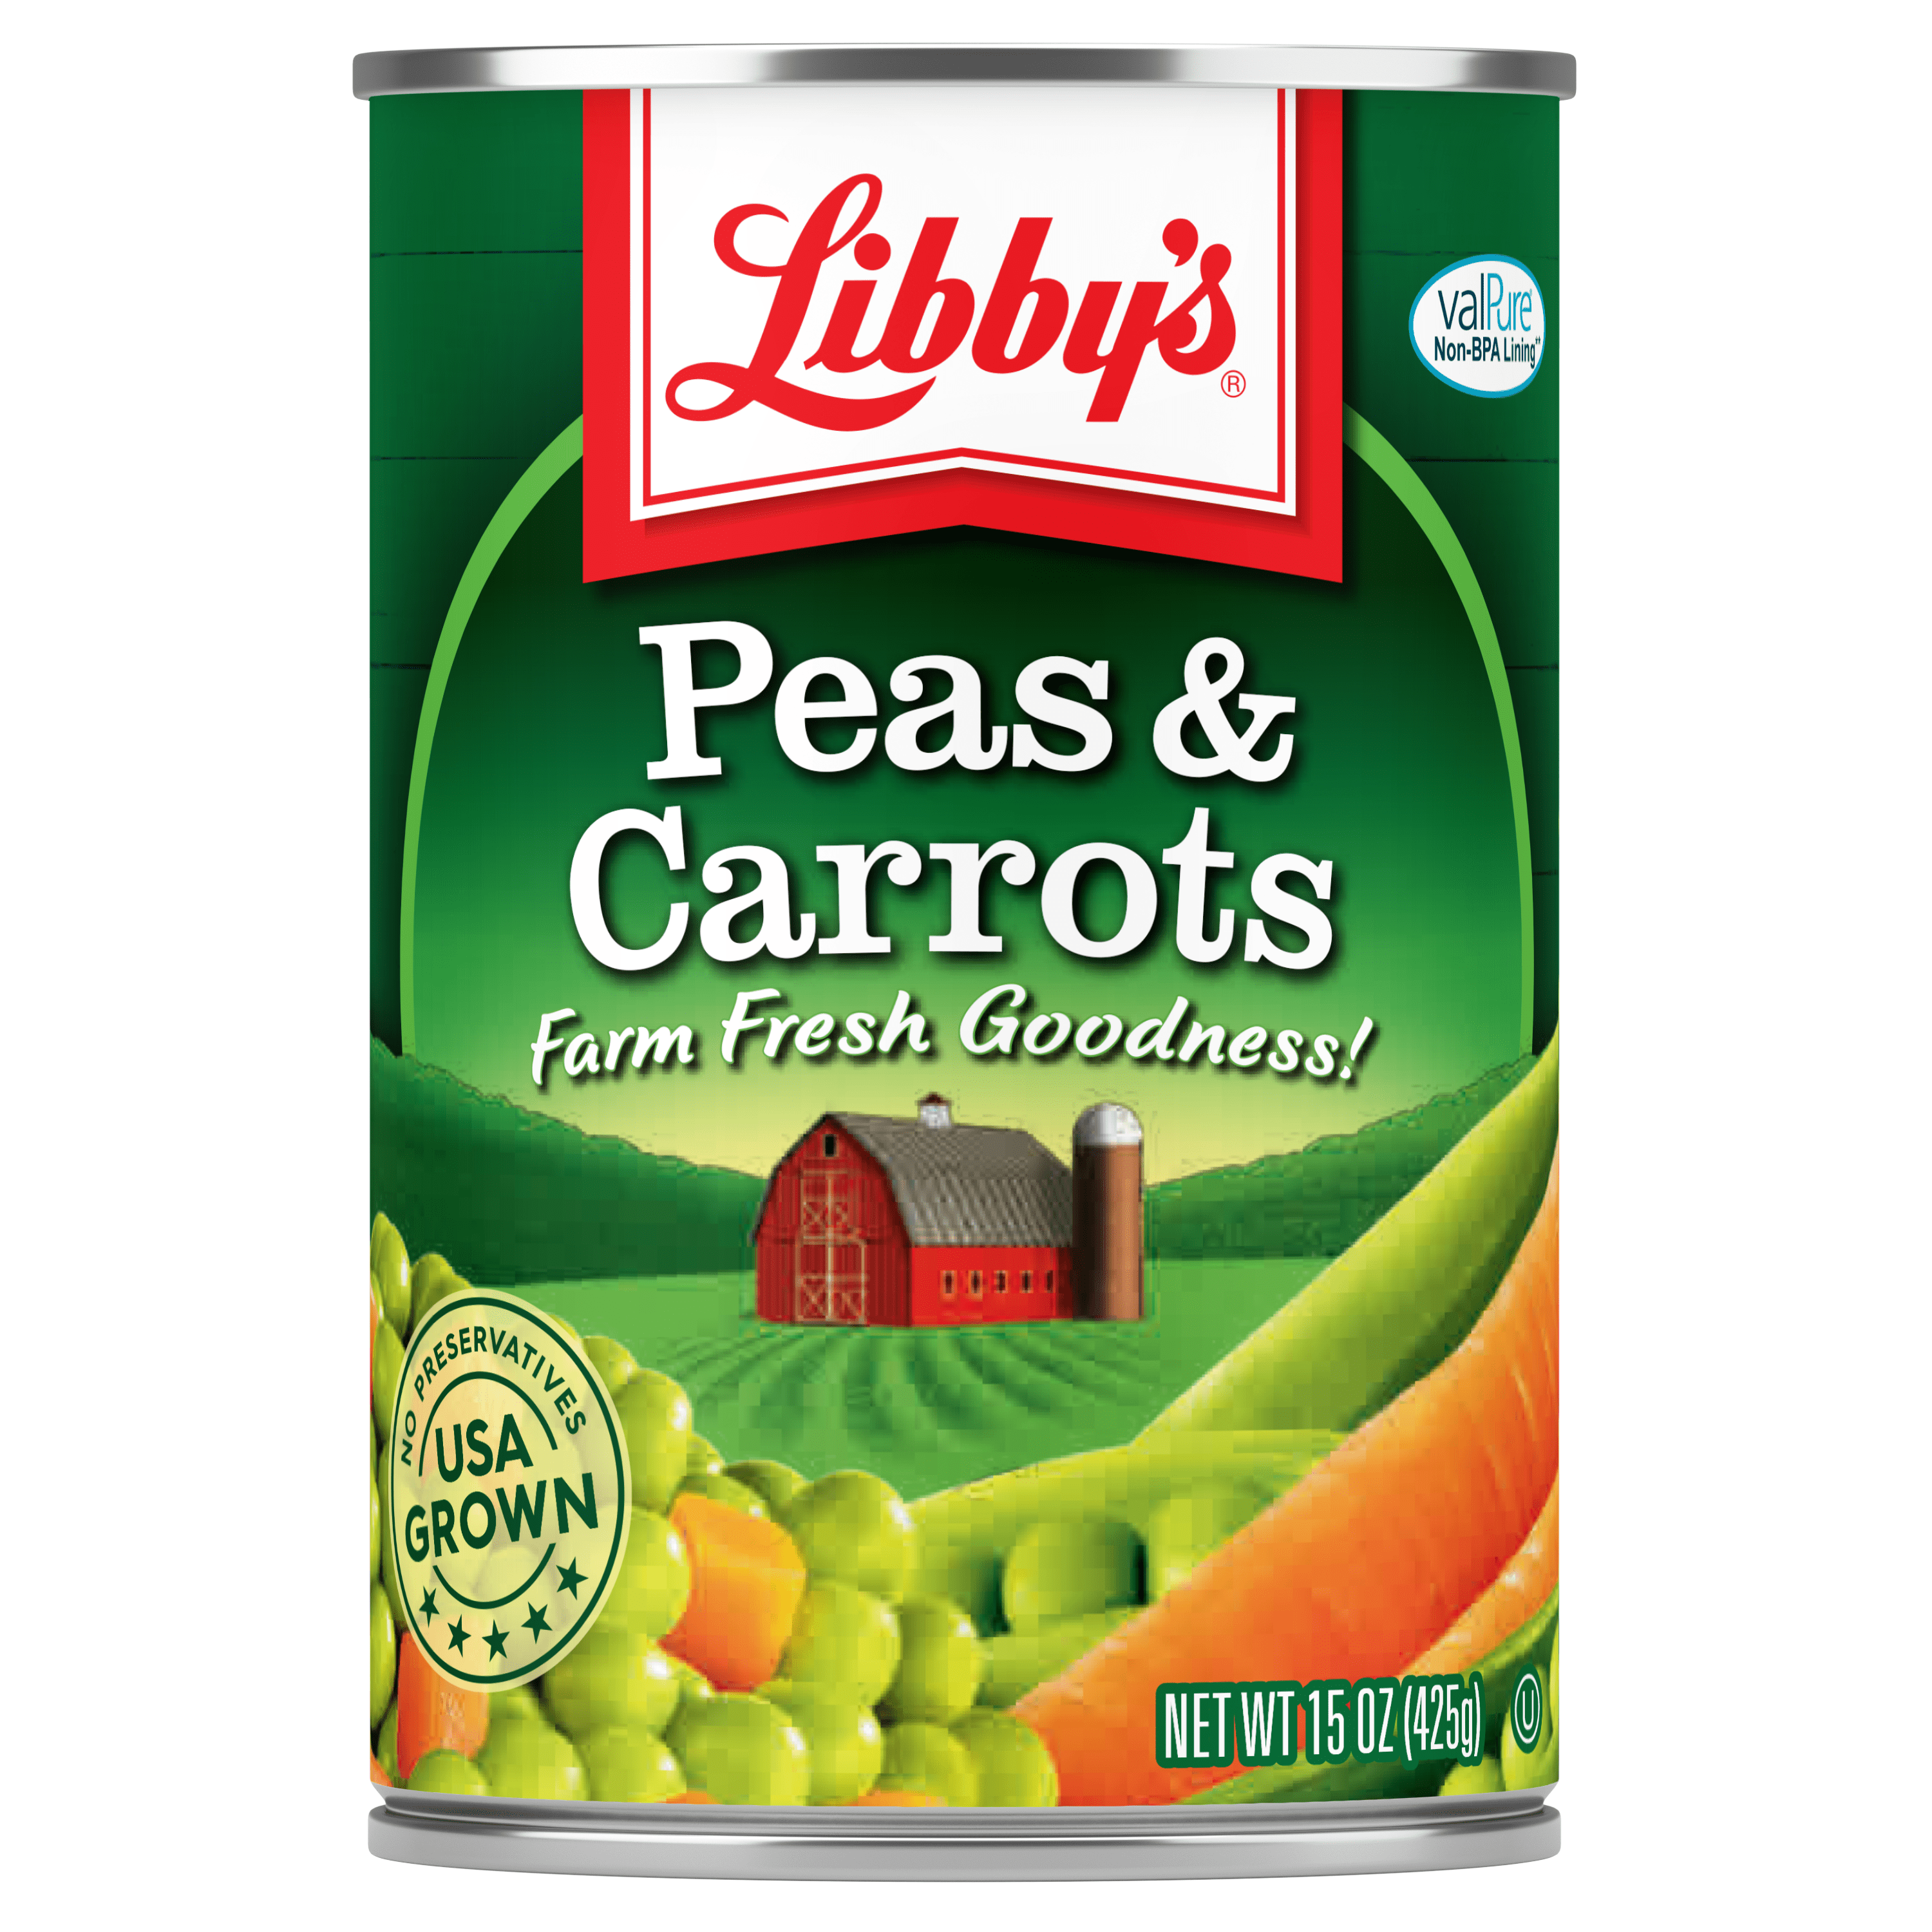 Libby's Canned Peas & Carrots 15 oz